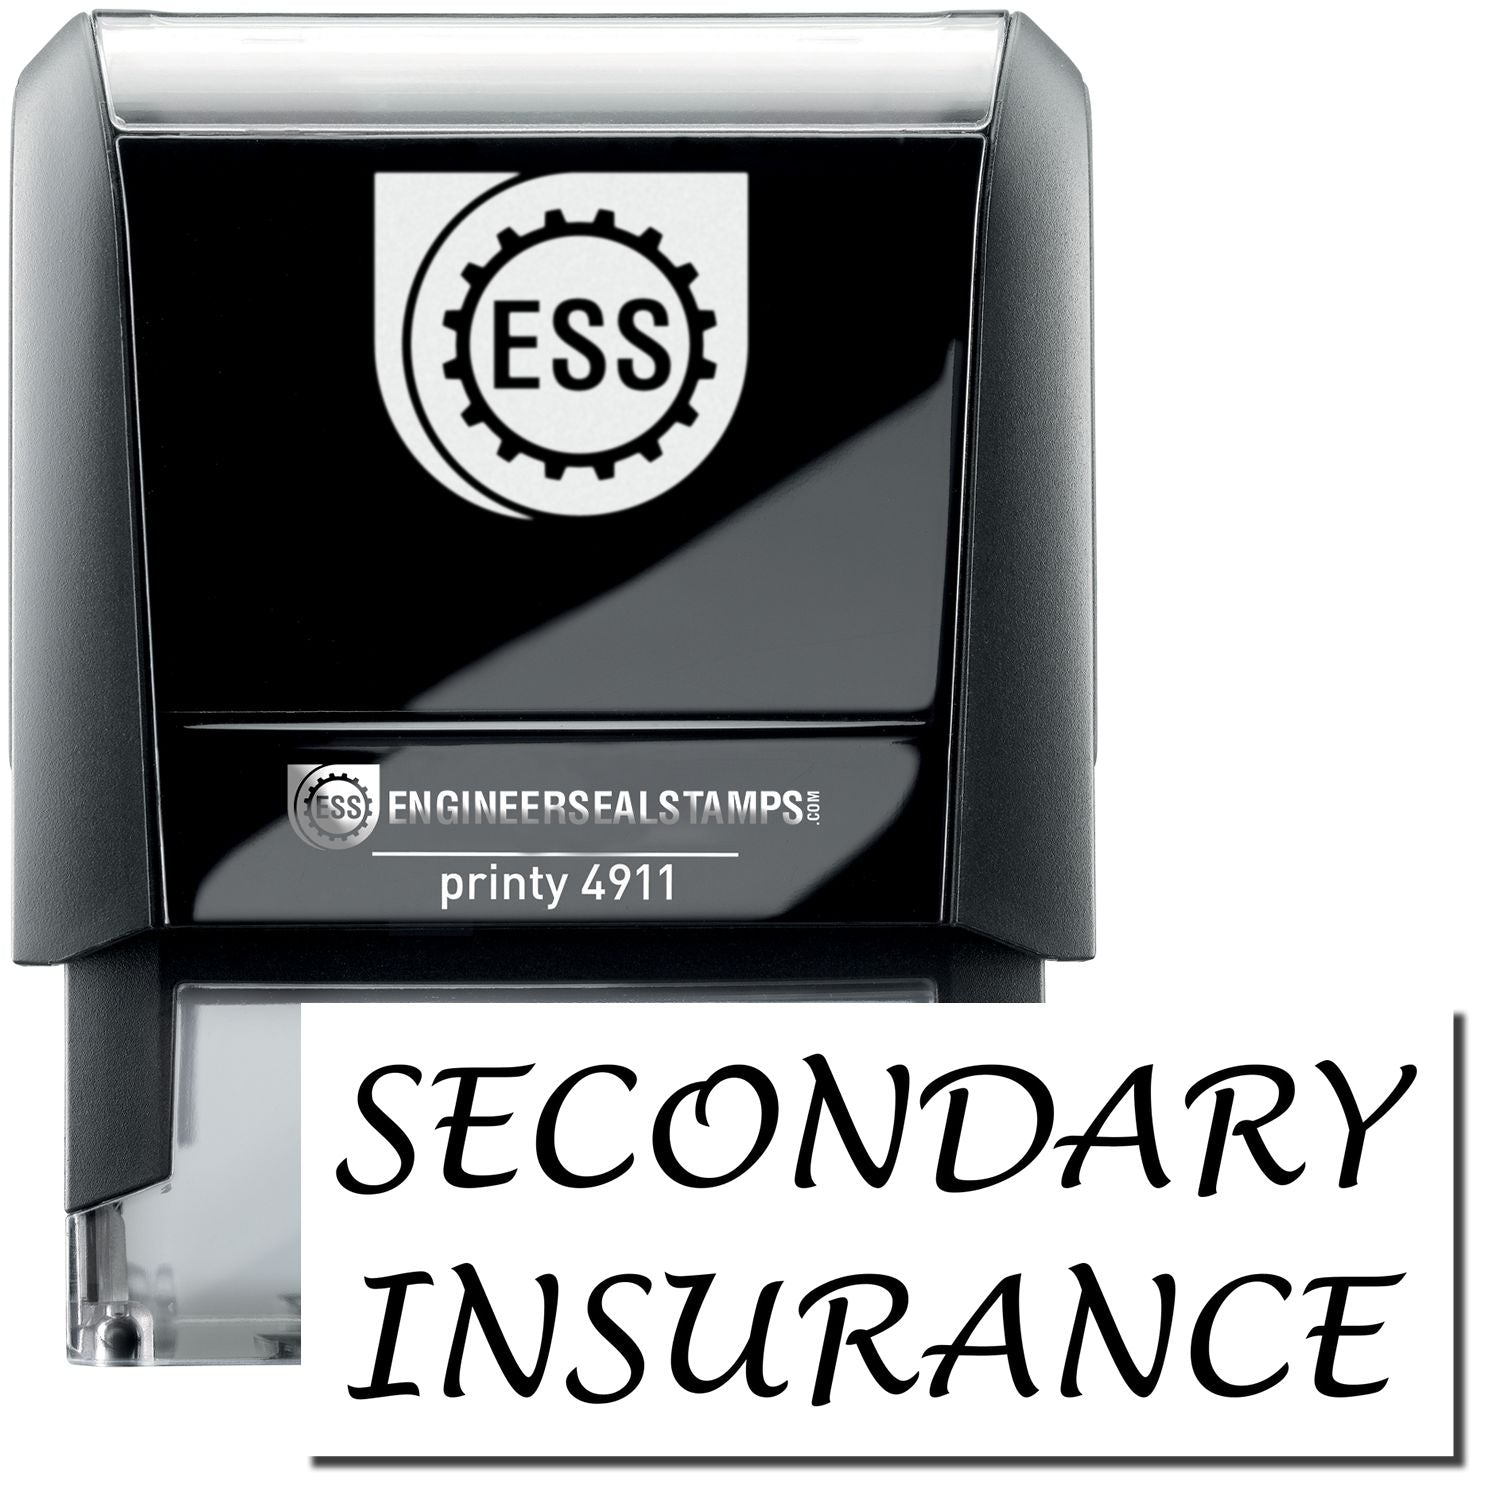 A self-inking stamp with a stamped image showing how the text "SECONDARY INSURANCE" is displayed after stamping.